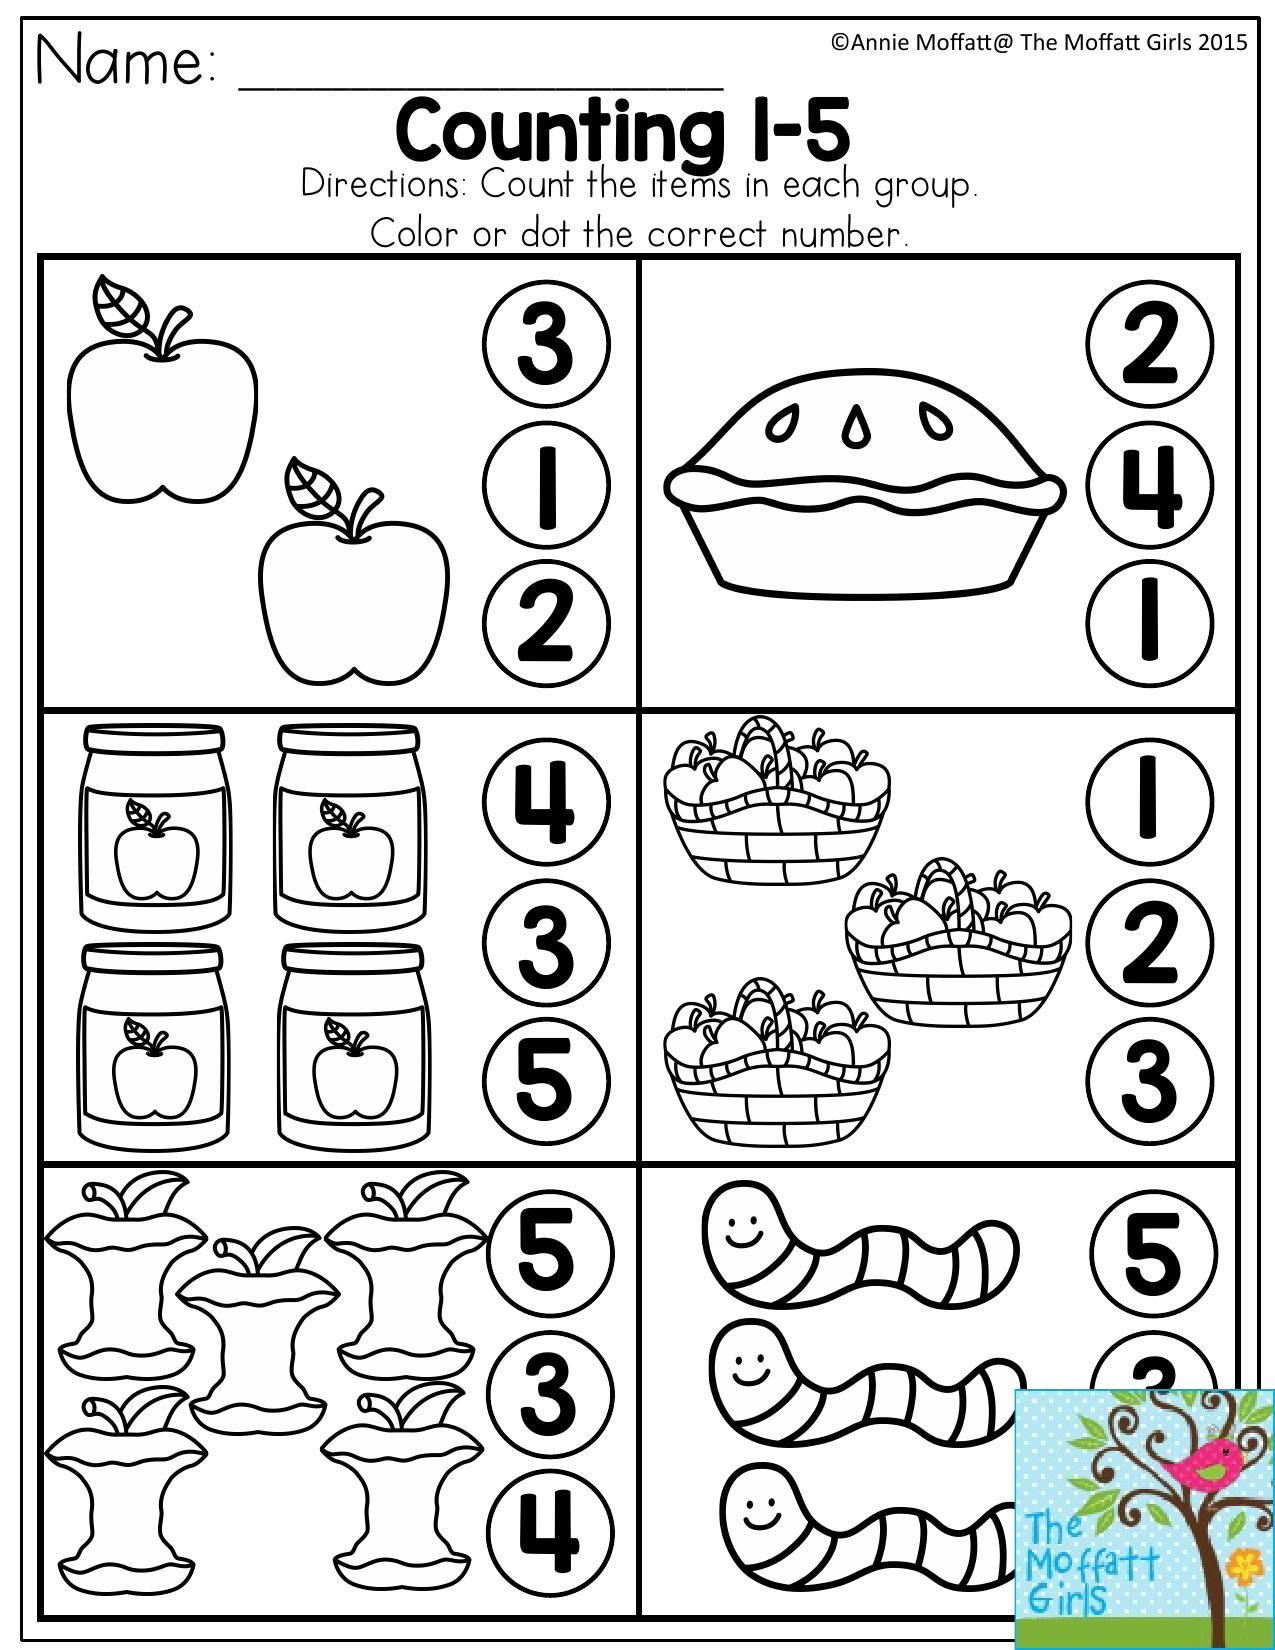 Counting 1-5. Count The Items In Each Group And Dot Or Color